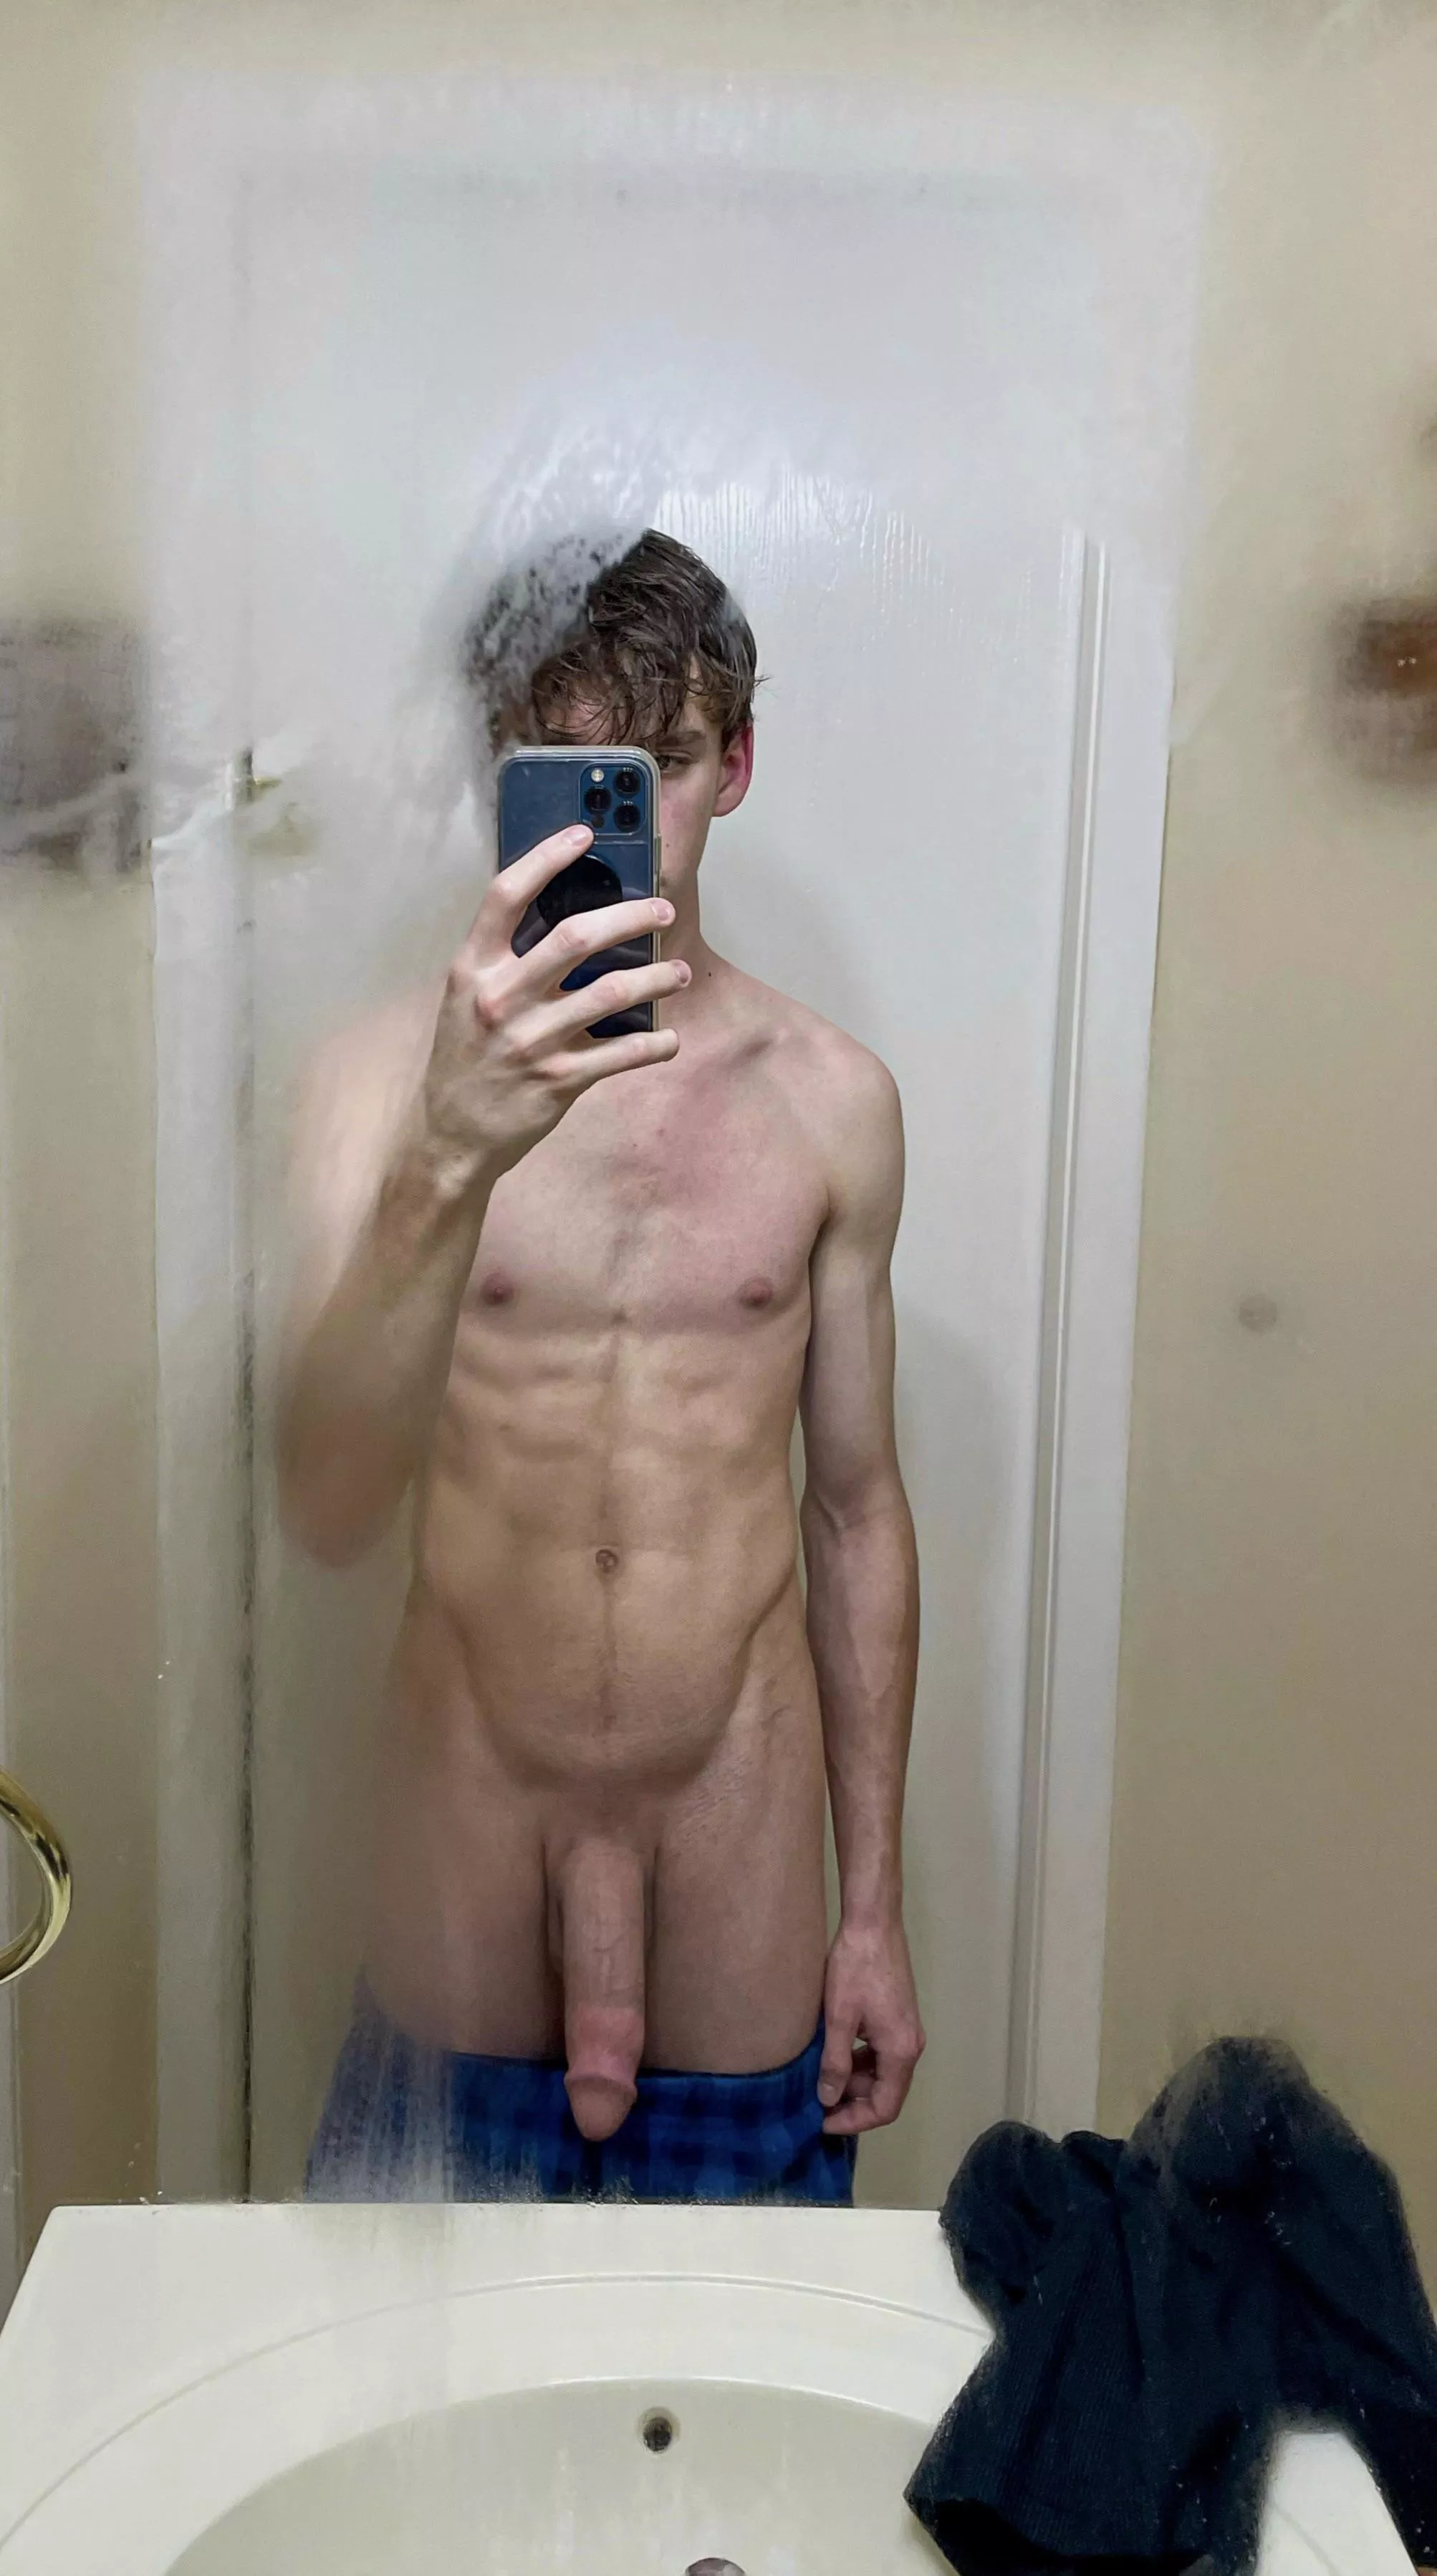 Old Cock Pics